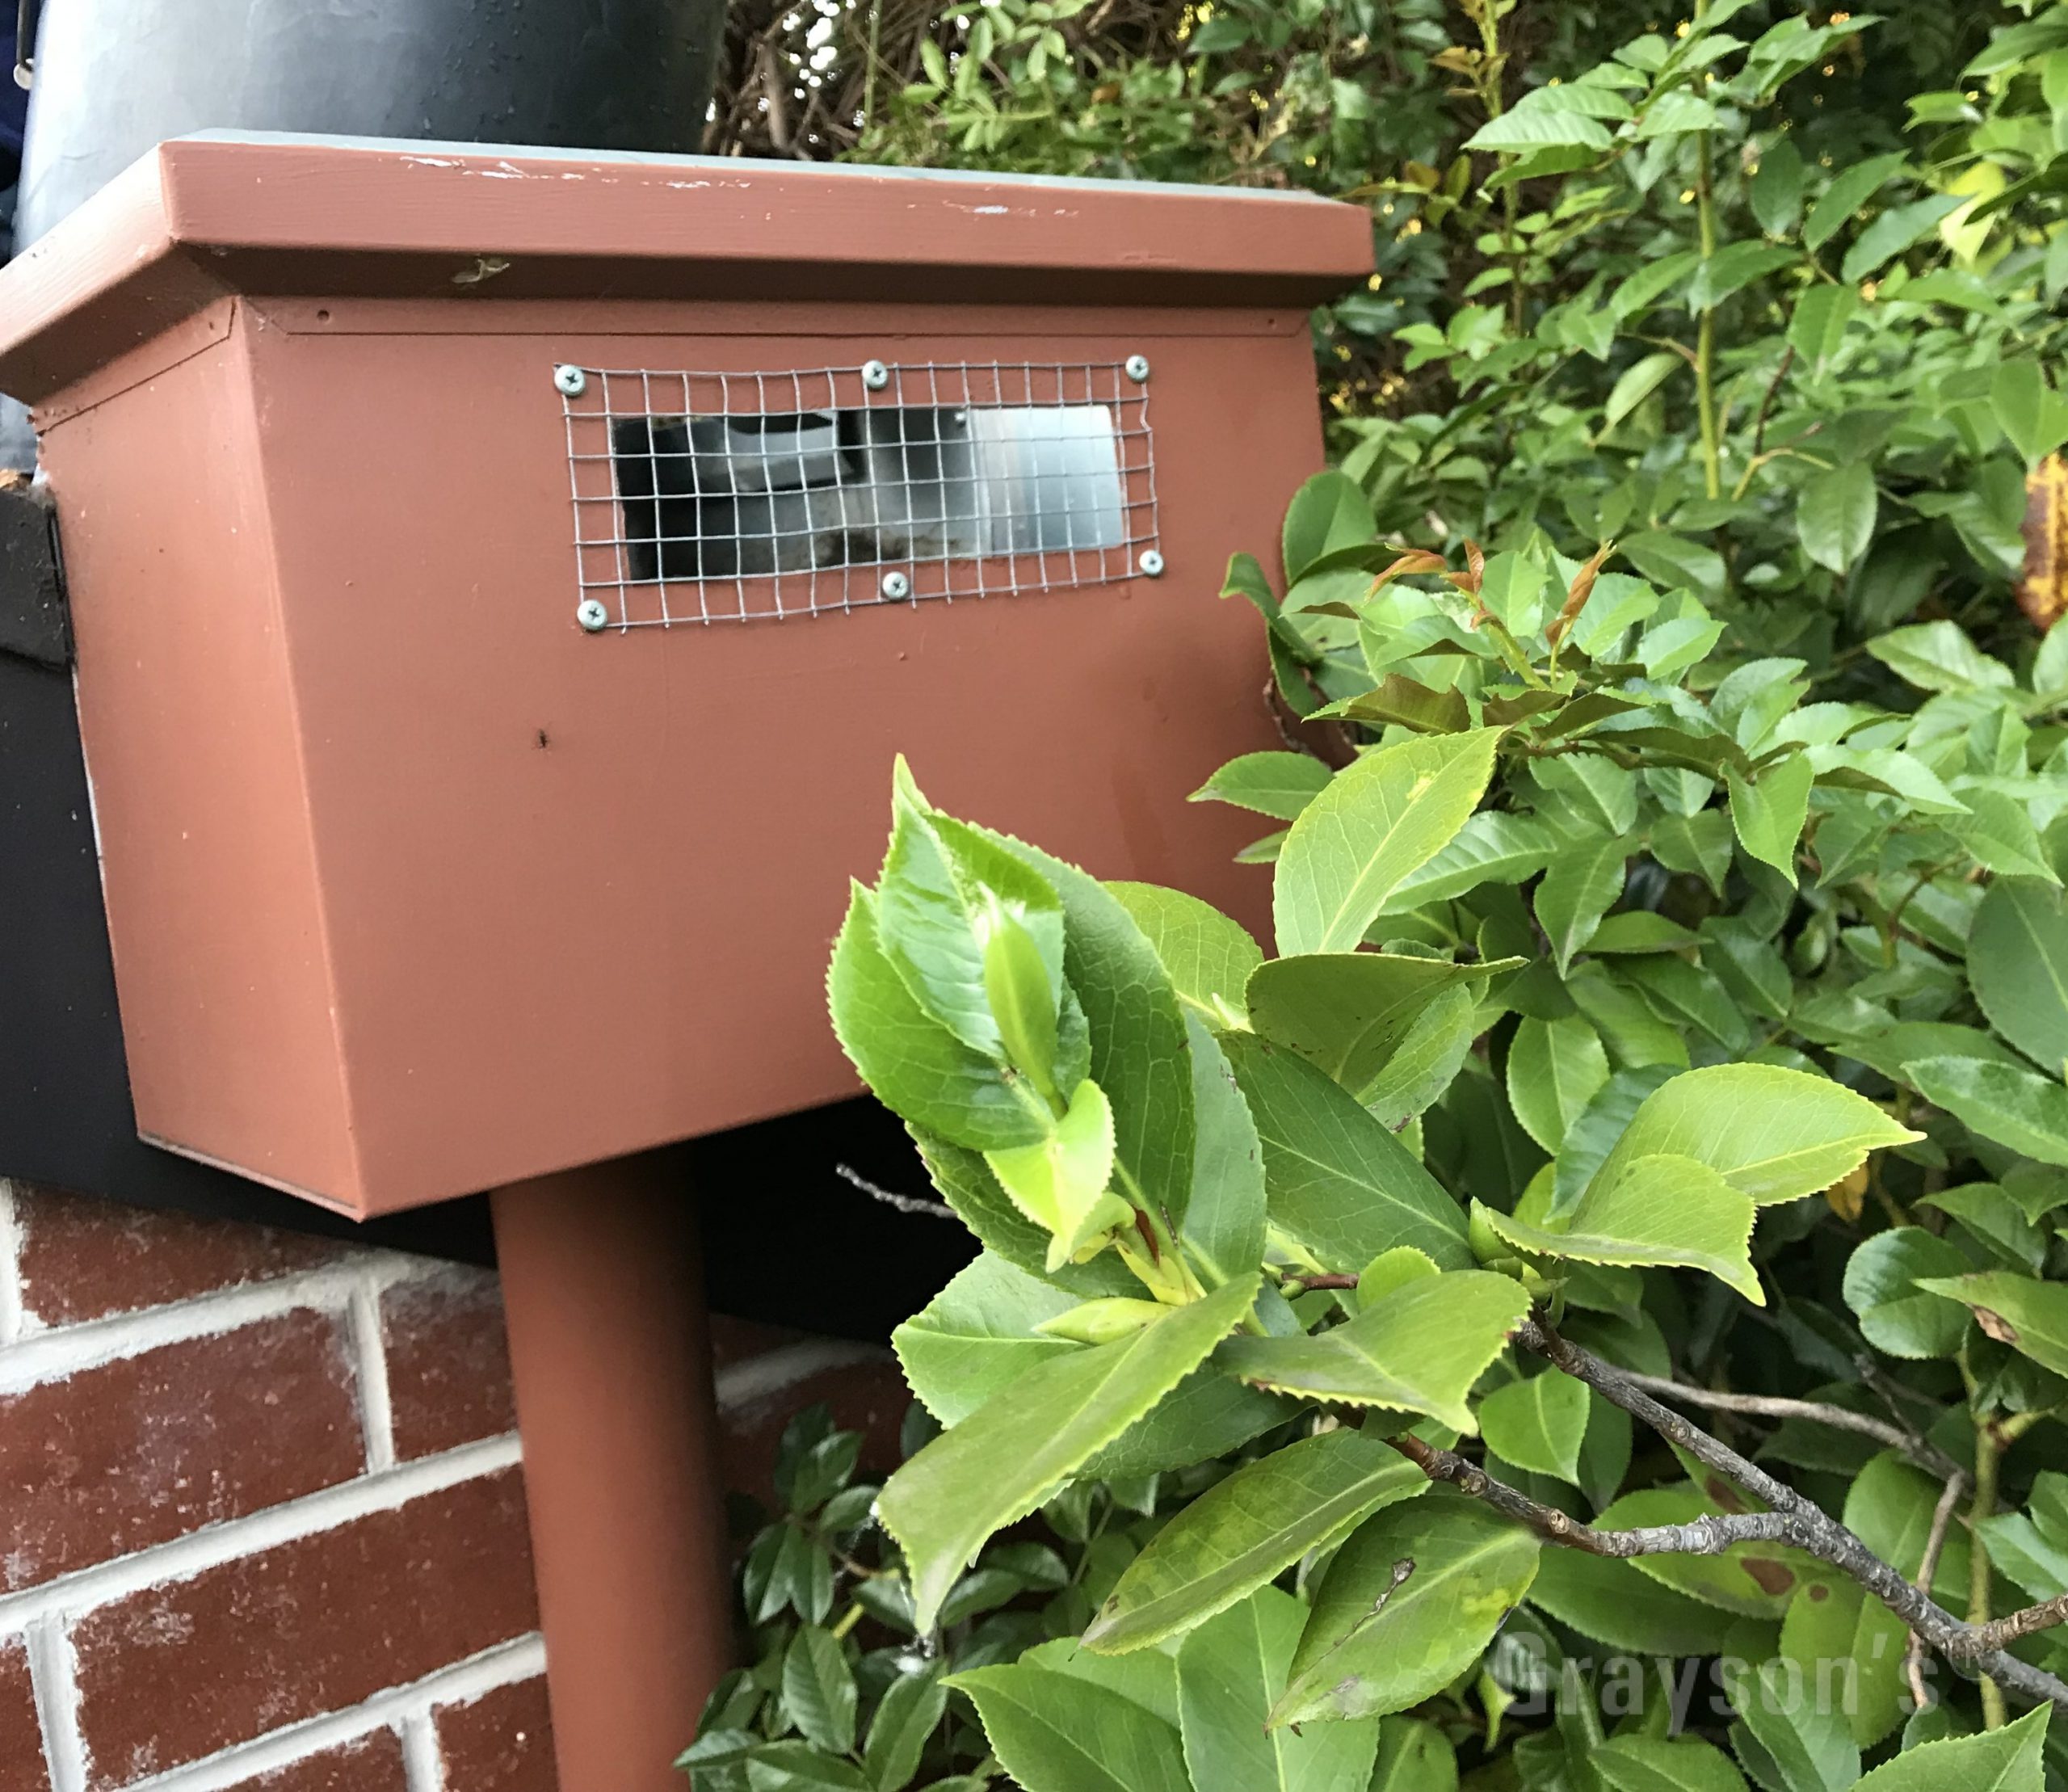 A bird proofing barrier, a piece of metal wire mesh installed on to the rainhead overflow hole to stop birds flying inside. Gutter leaf protection meshes should ideally have smaller holes but this application is quite different.